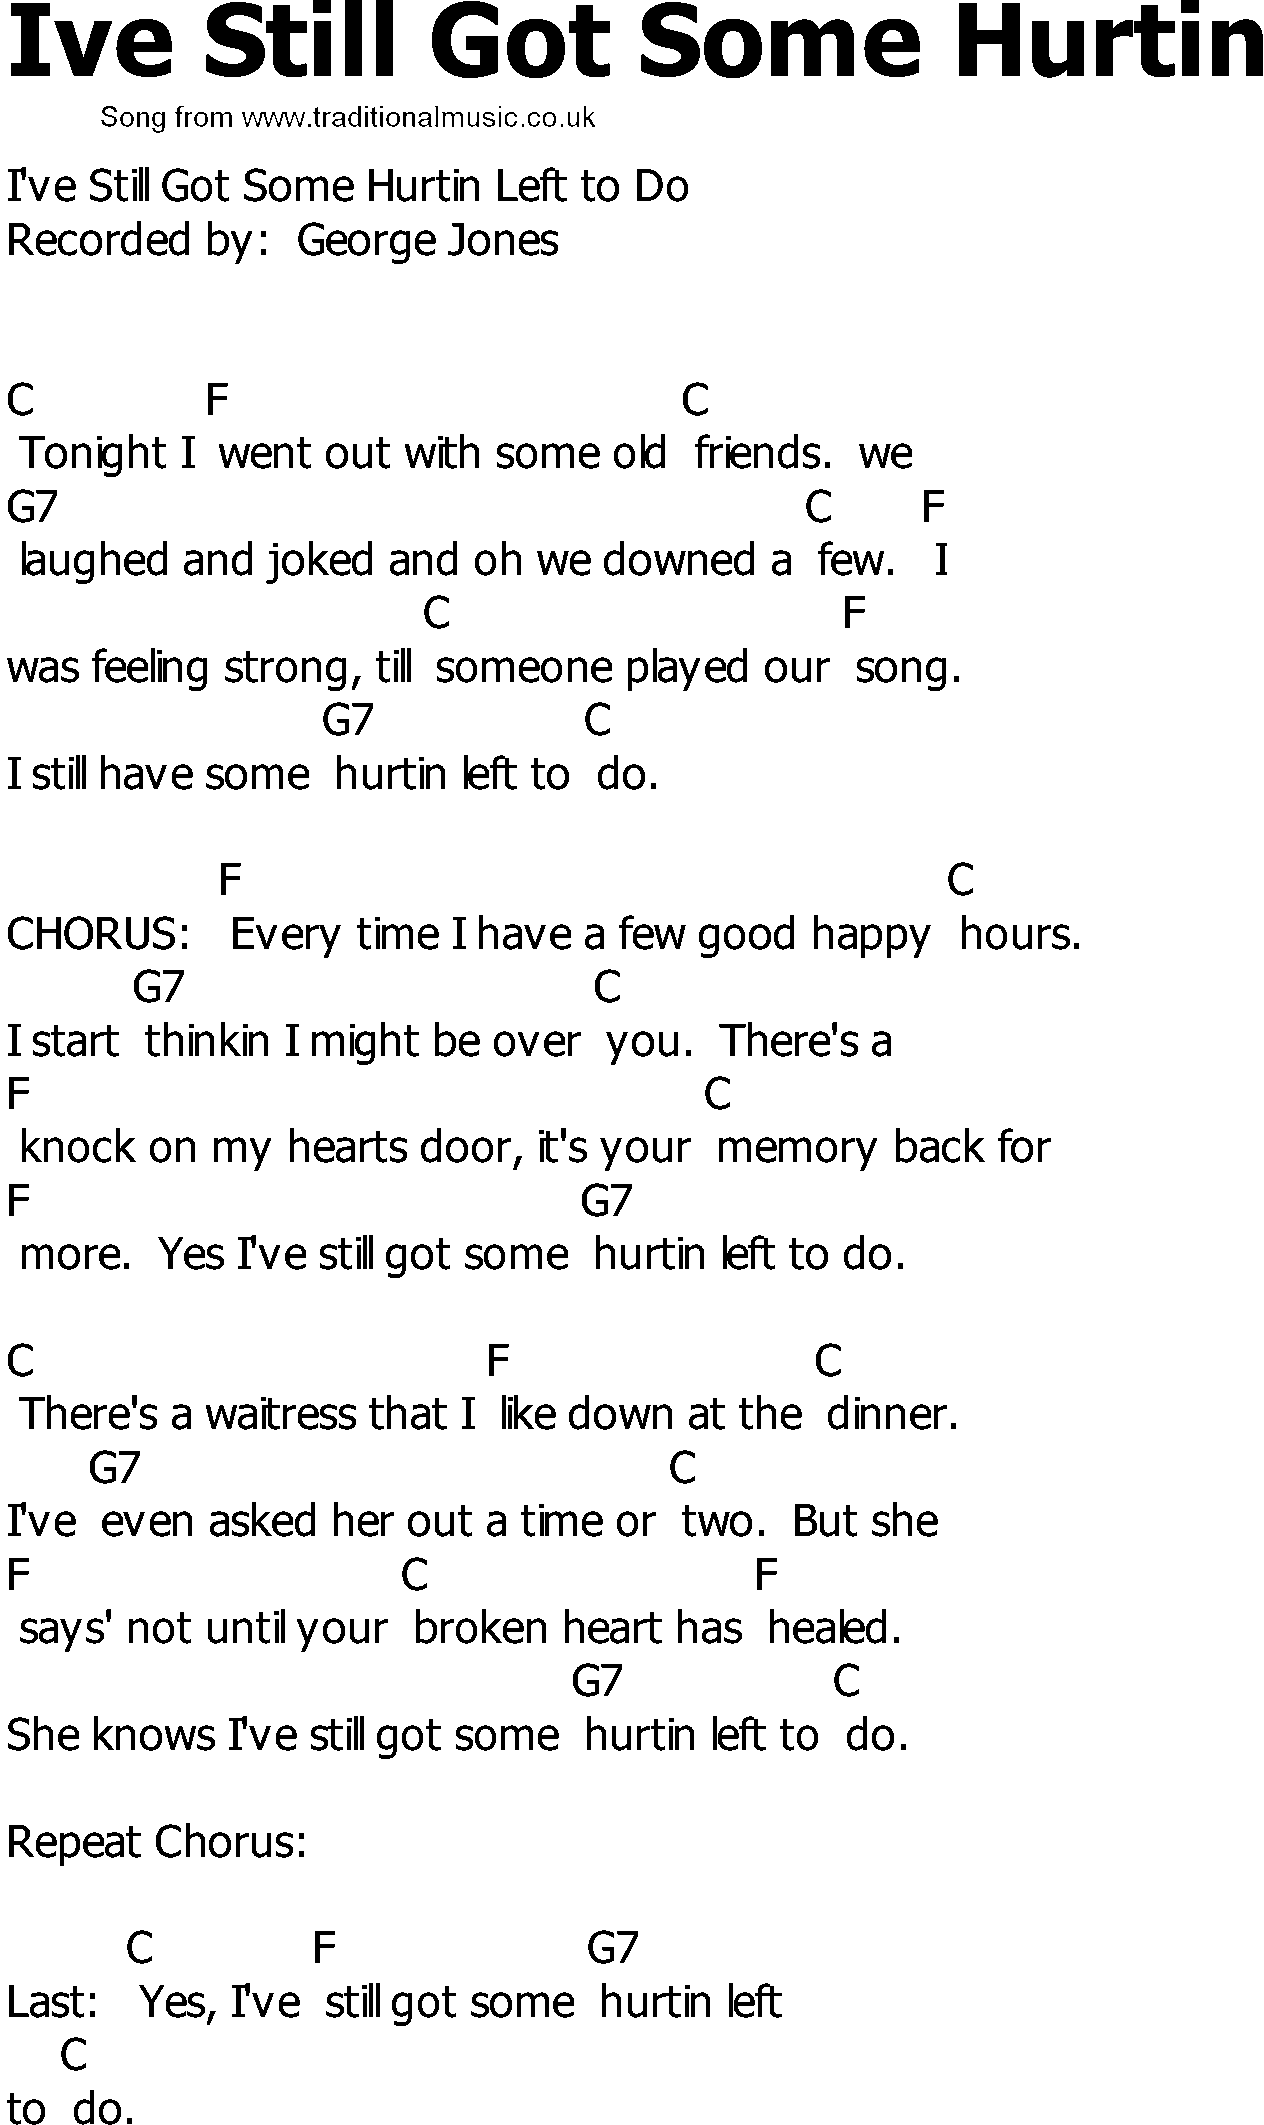 Old Country song lyrics with chords - Ive Still Got Some Hurtin